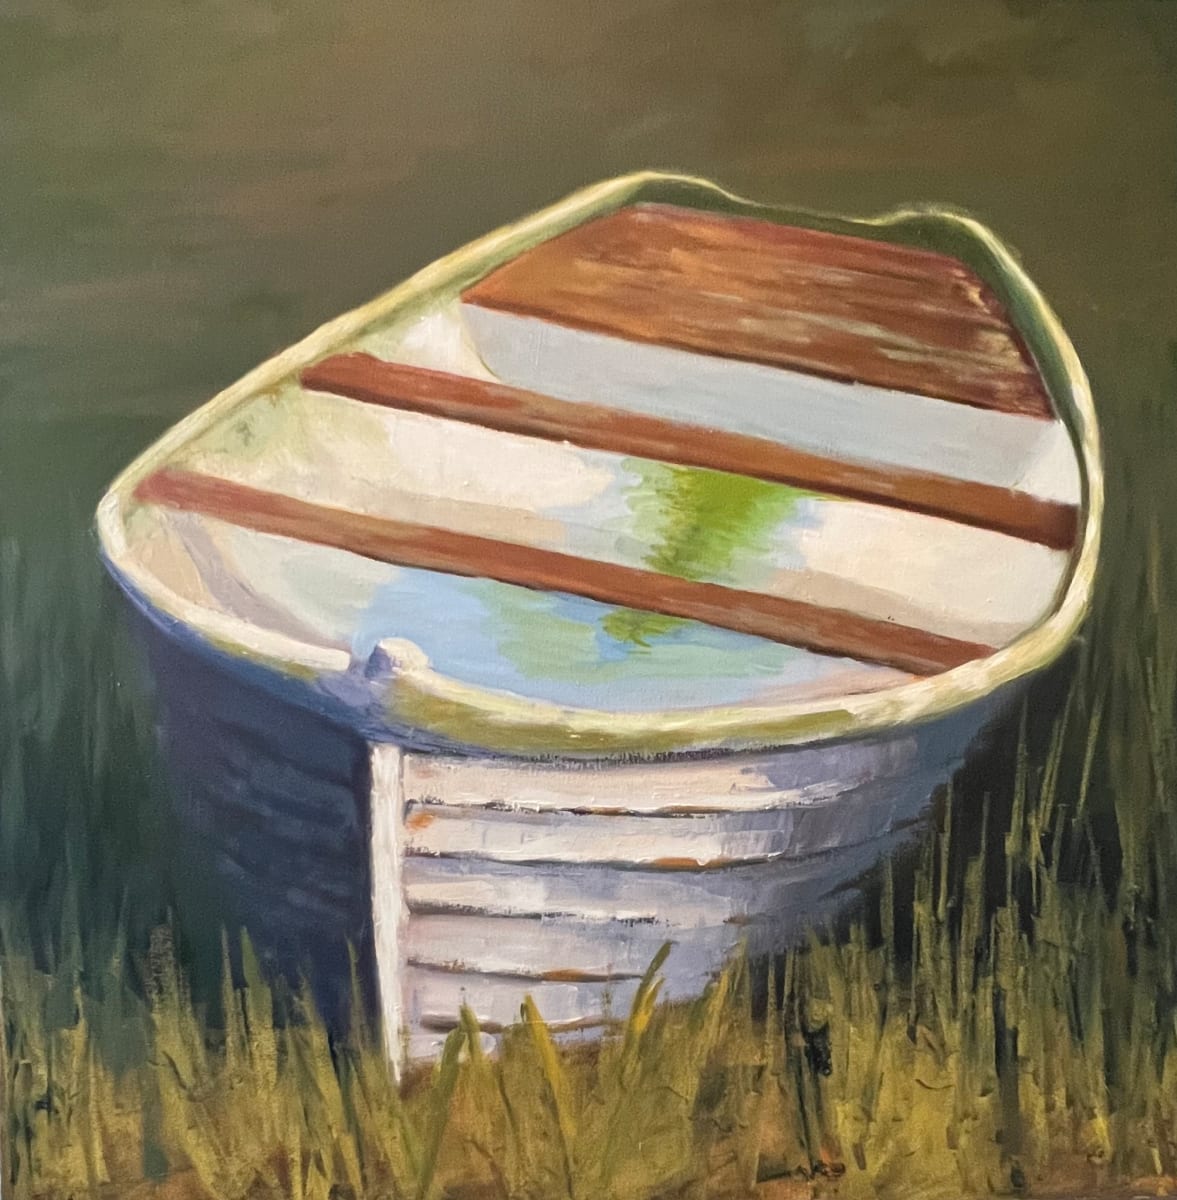 Until Next Summer by Mary Kamerer Impressionist Painting  Image: I love finding beauty in rustic things. They often have the character and textures that make life interesting.  They hold the stories of summers past, spent at the coast or at a lake house. I love bringing back those memories or feelings every time someone looks at my work